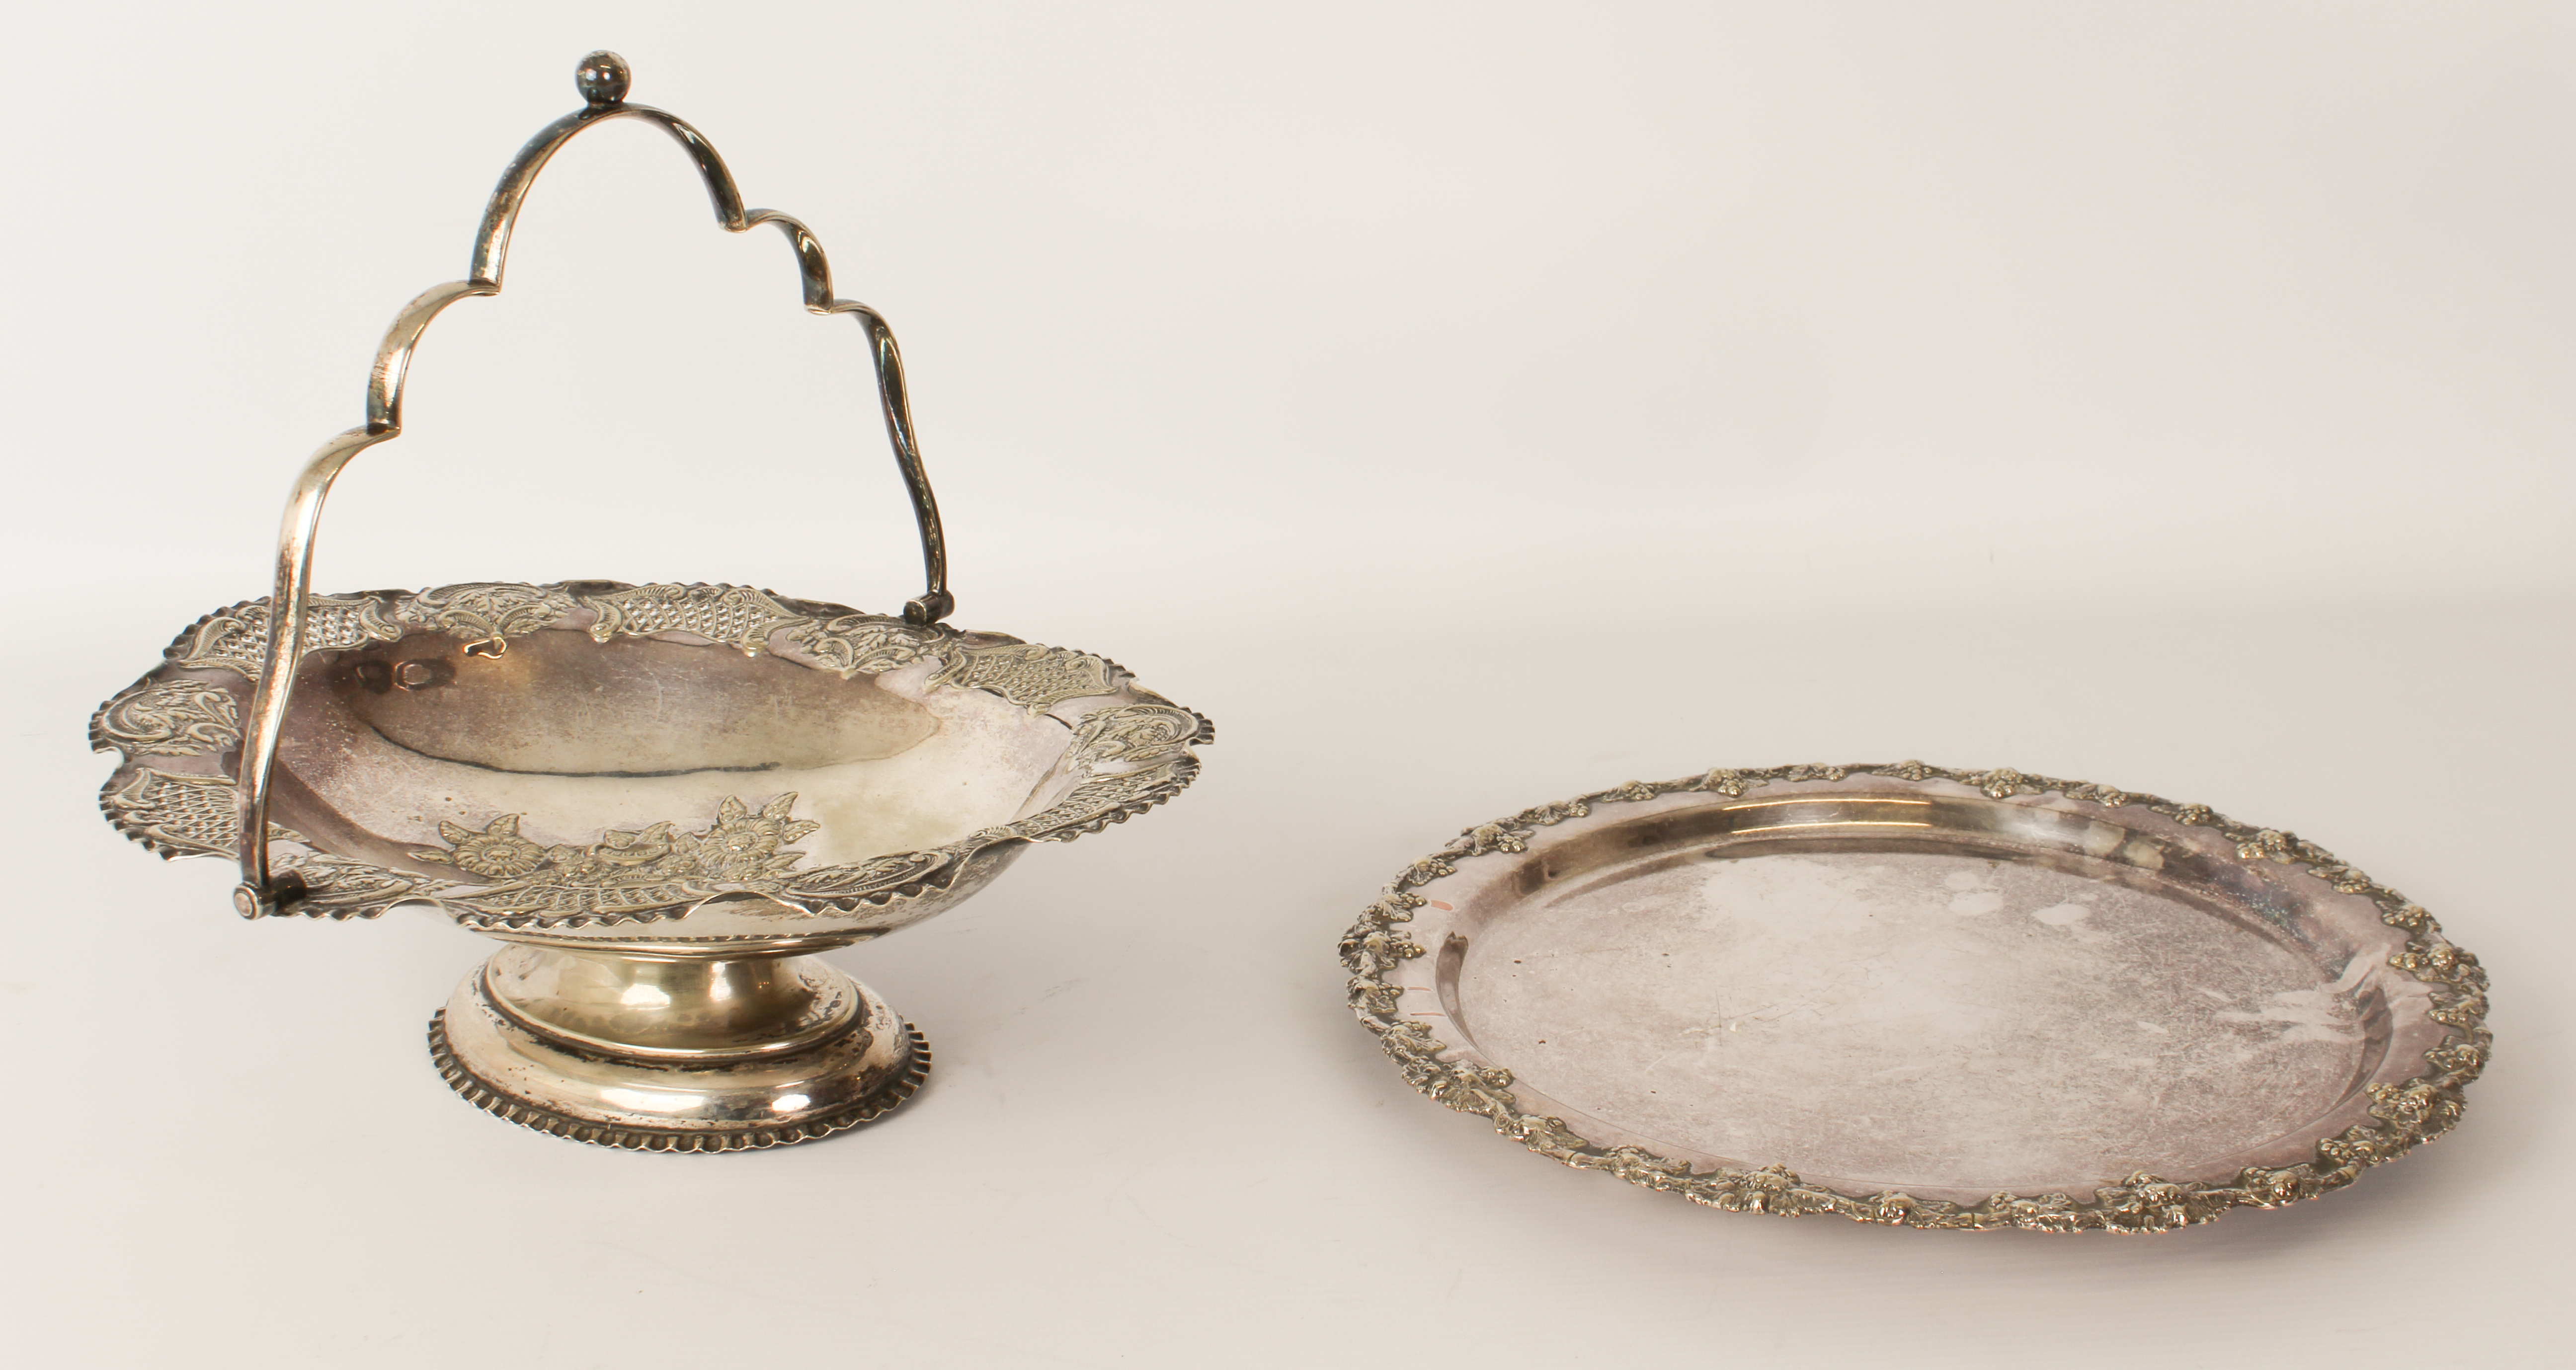 A silver-plated tray with fruiting vine border, on three bun feet (29 cm diameter) together with a